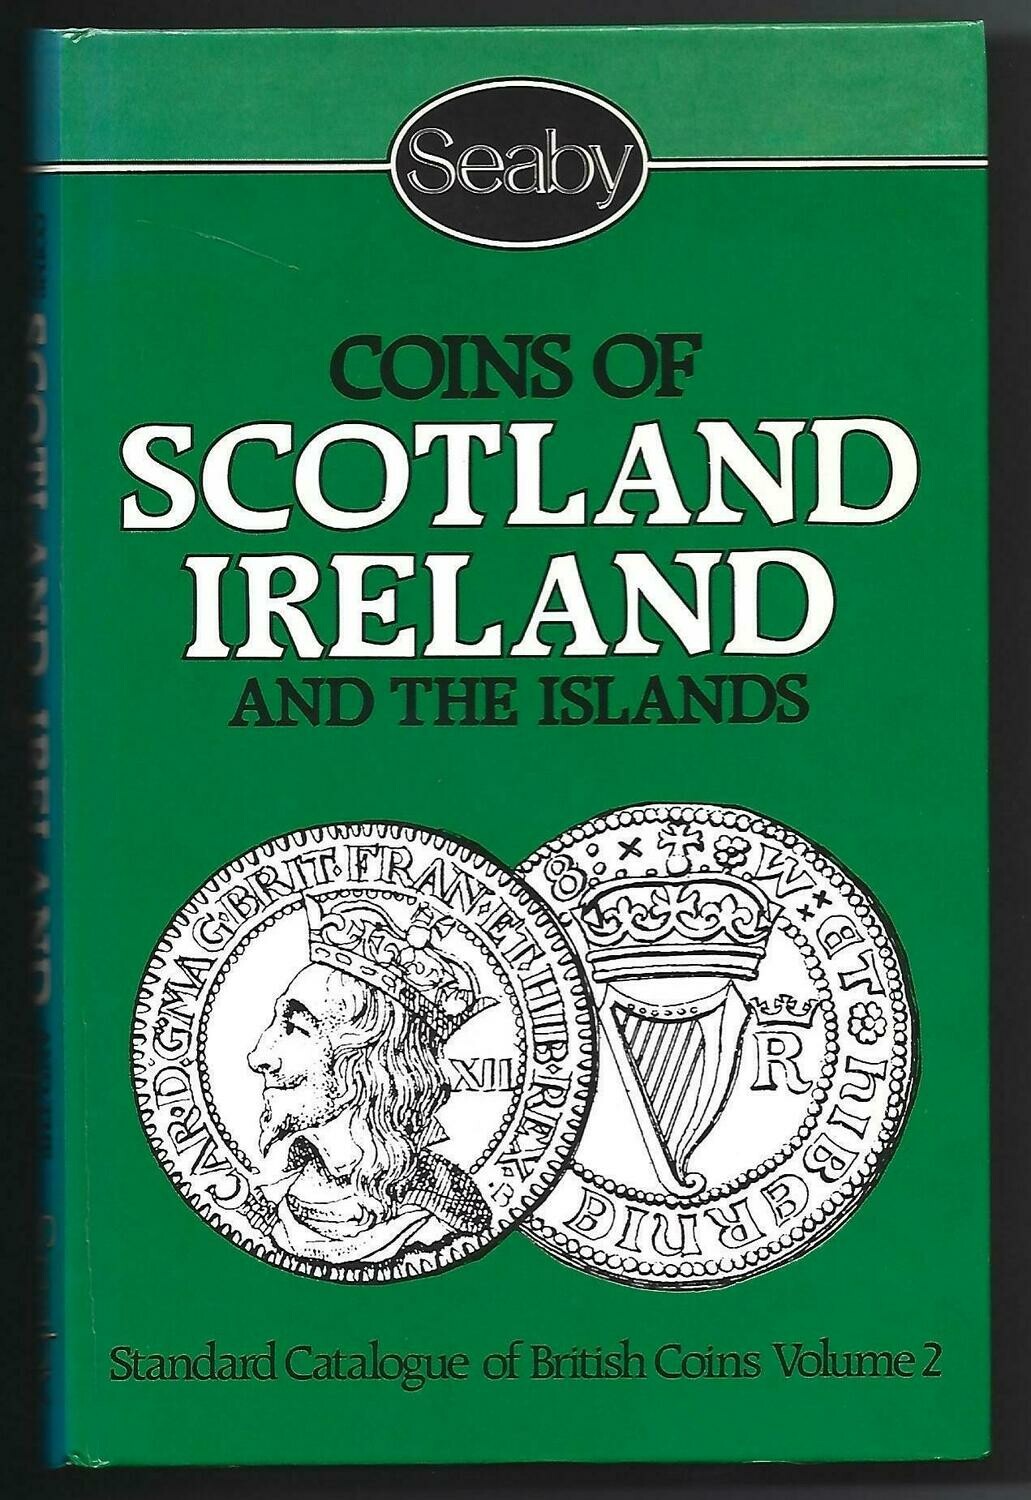 British; Peter Seaby & P. Frank Purvey, "Coins of Scotland, Ireland and the Islands."